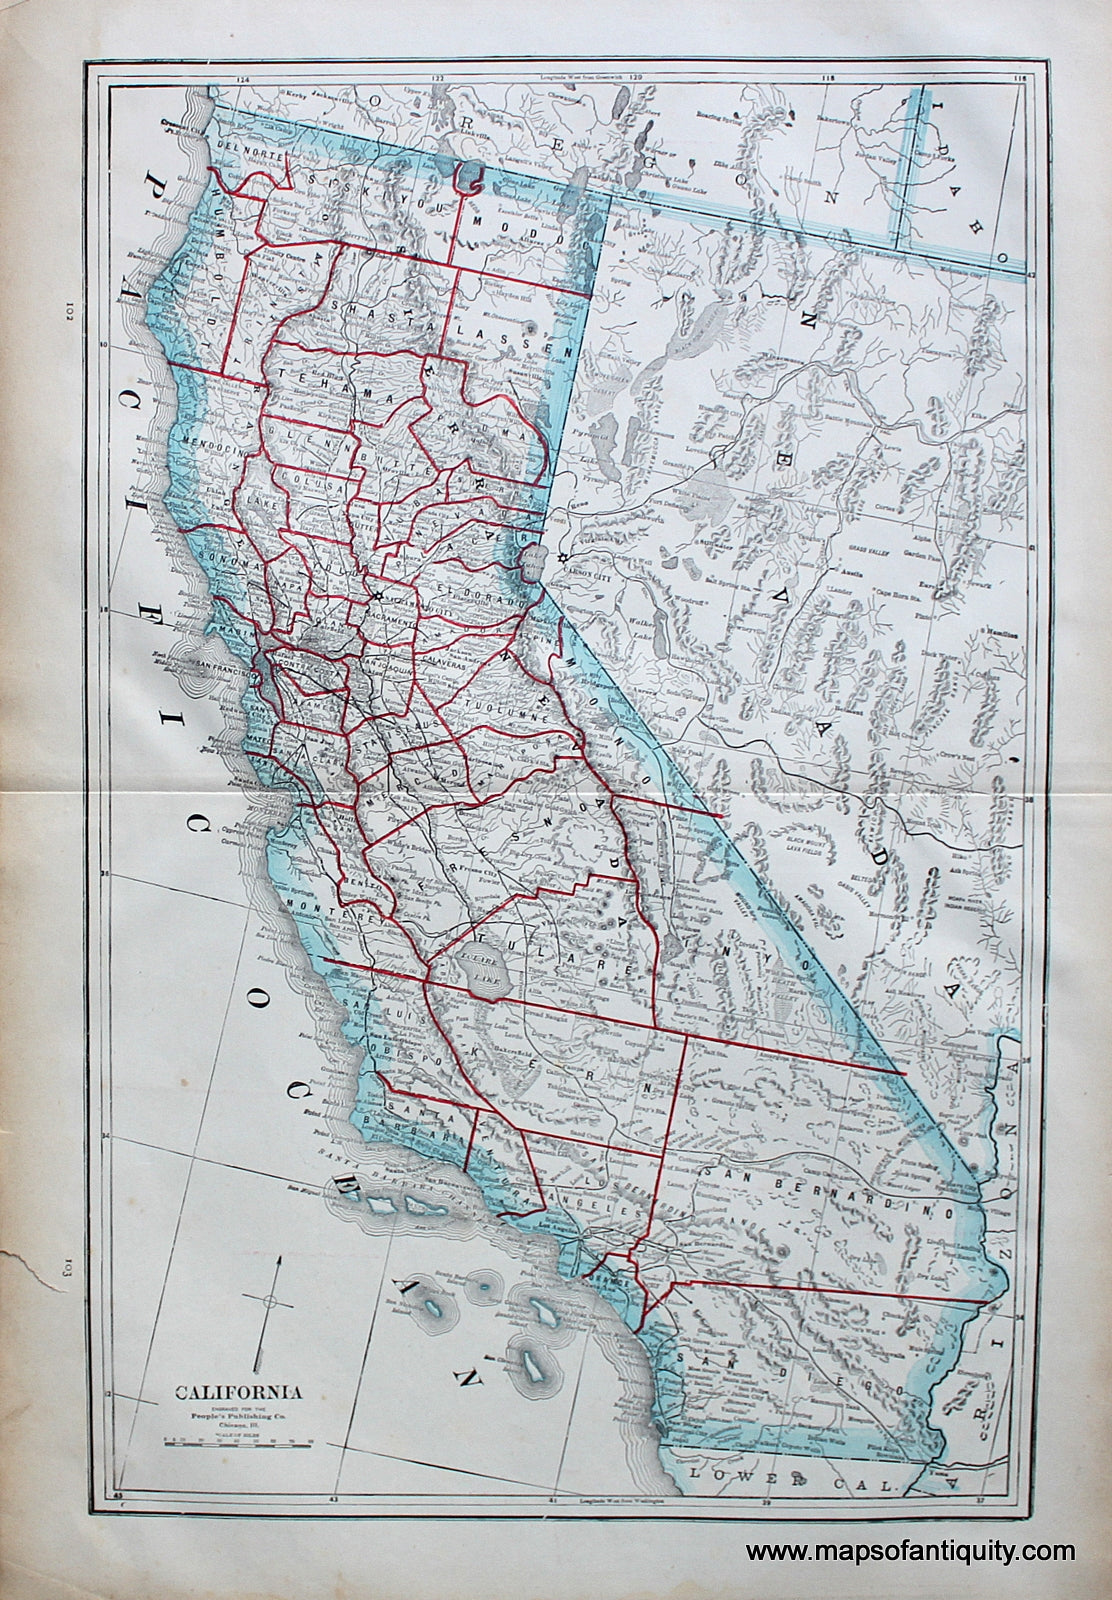 Antique-Map-California-United-States-West-1910-People's-Publishing-Co.-Maps-Of-Antiquity